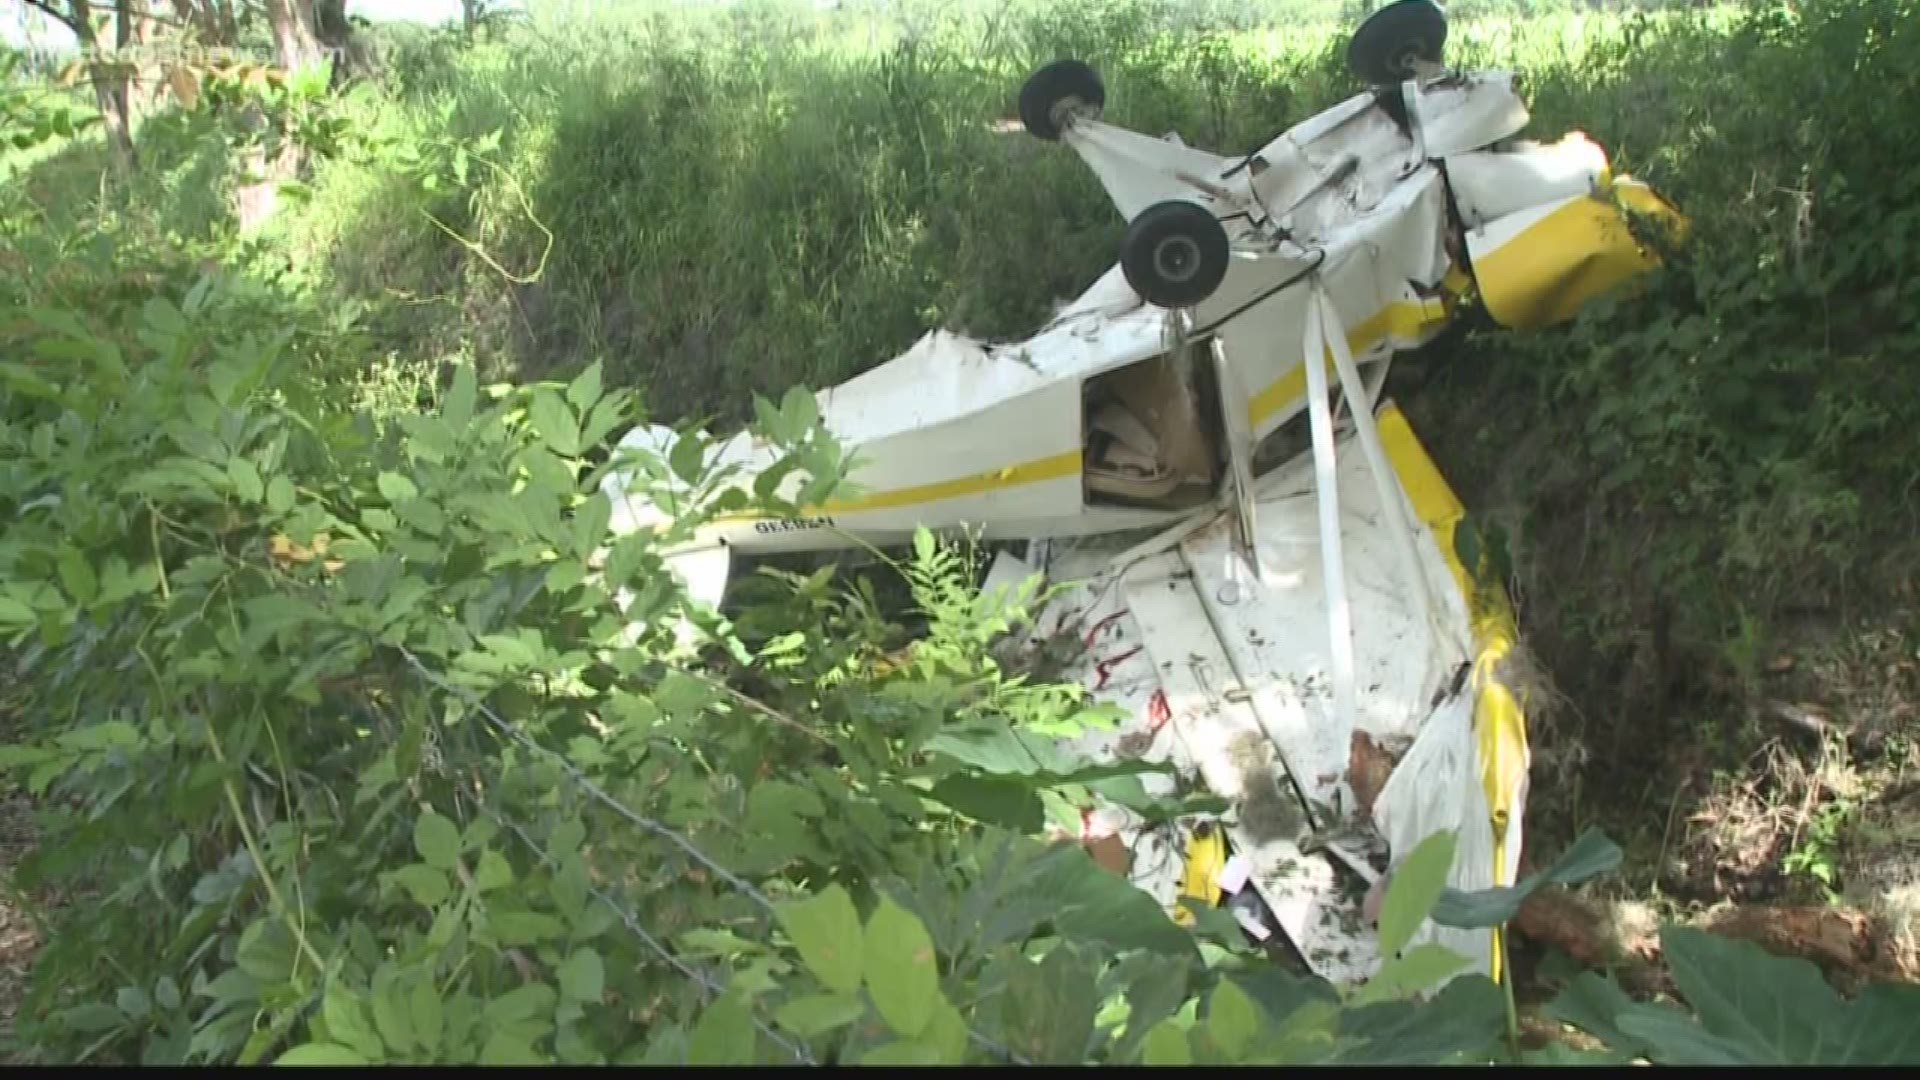 On Your Side spoke to the woman who lives on the property where the crash happened. She declined to be interviewed, but she said she was gardening when she heard a loud noise and a "boom." She turned and saw one of the passengers calling for help from the door of the plane.